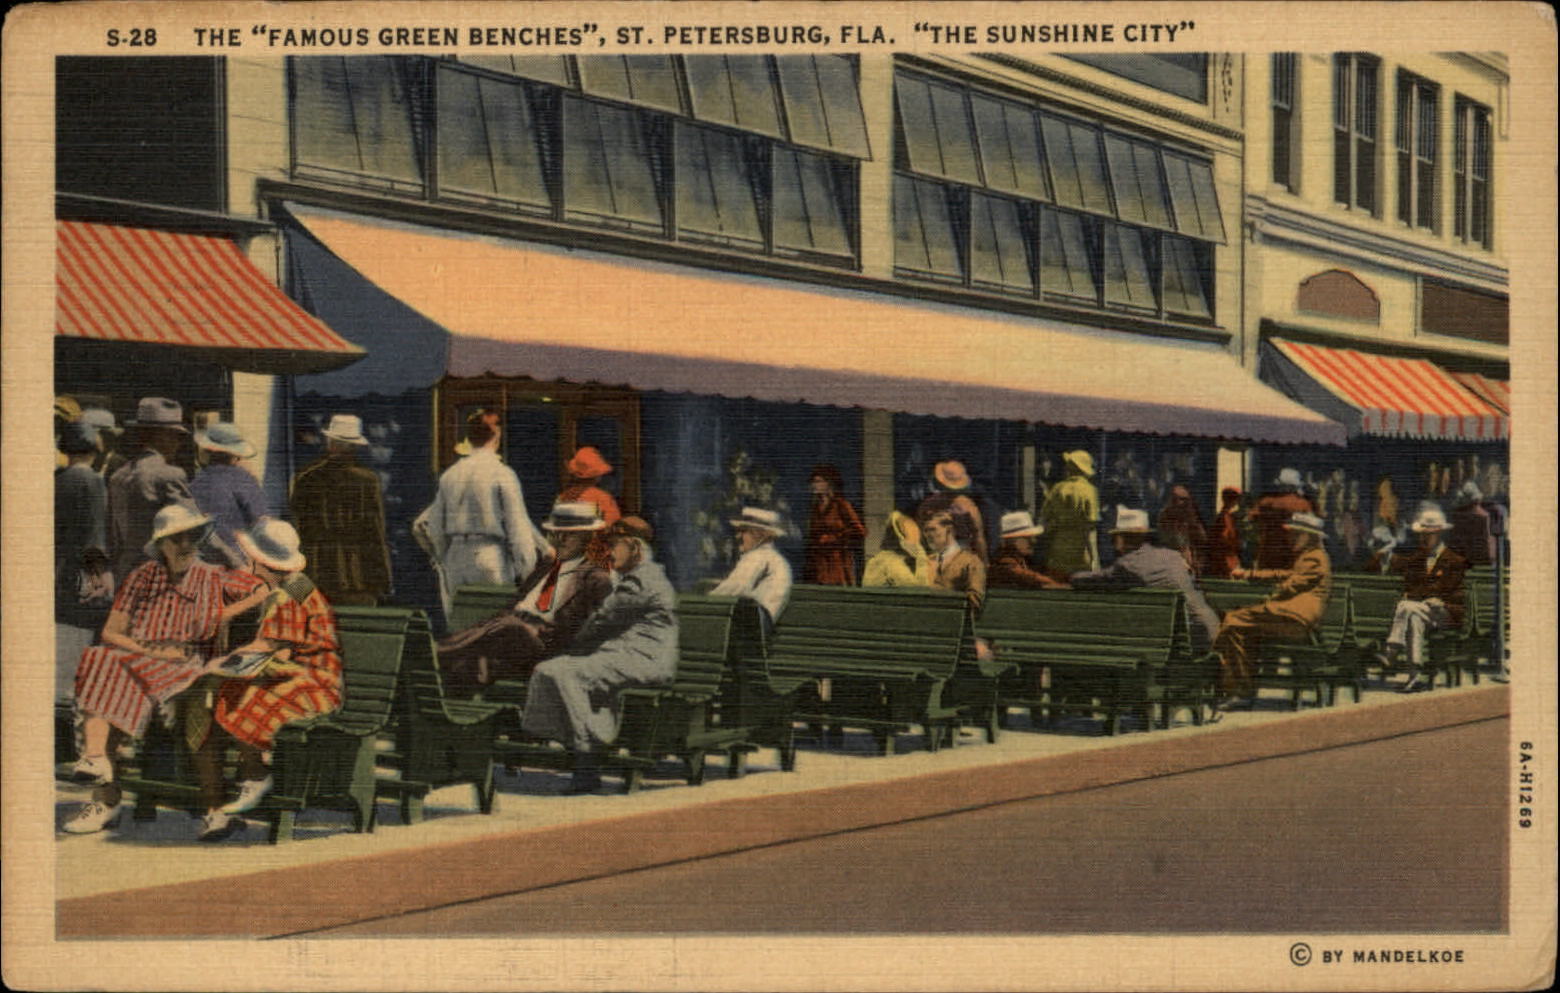 St Petersburg Florida Green Benches 1920s fashions mailed 1933 linen postcard